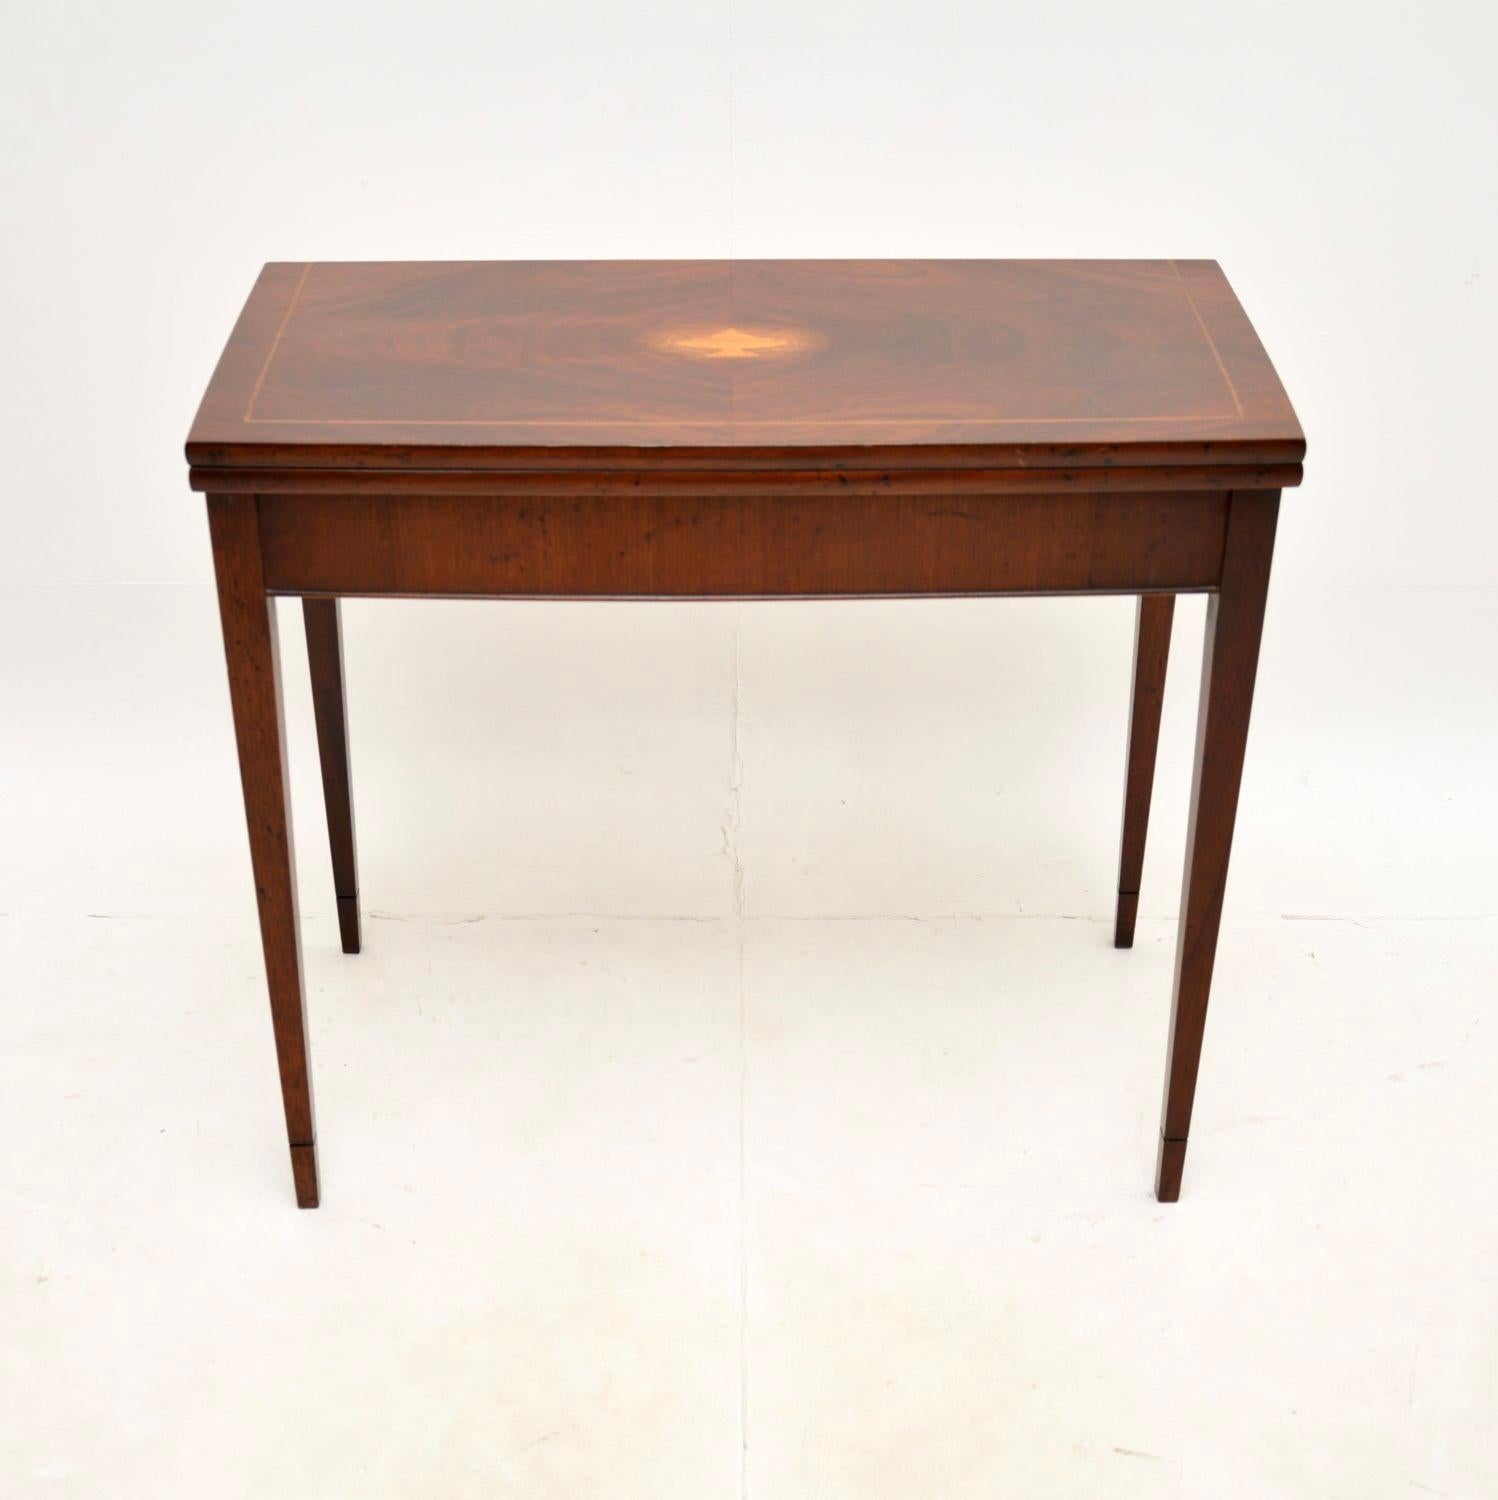 A lovely antique inlaid card / console table in the Georgian style. This was made in England, it dates from around the 1950’s.

It is of superb quality and is a very useful size to be used as a console table. The top swivels round and flips open to